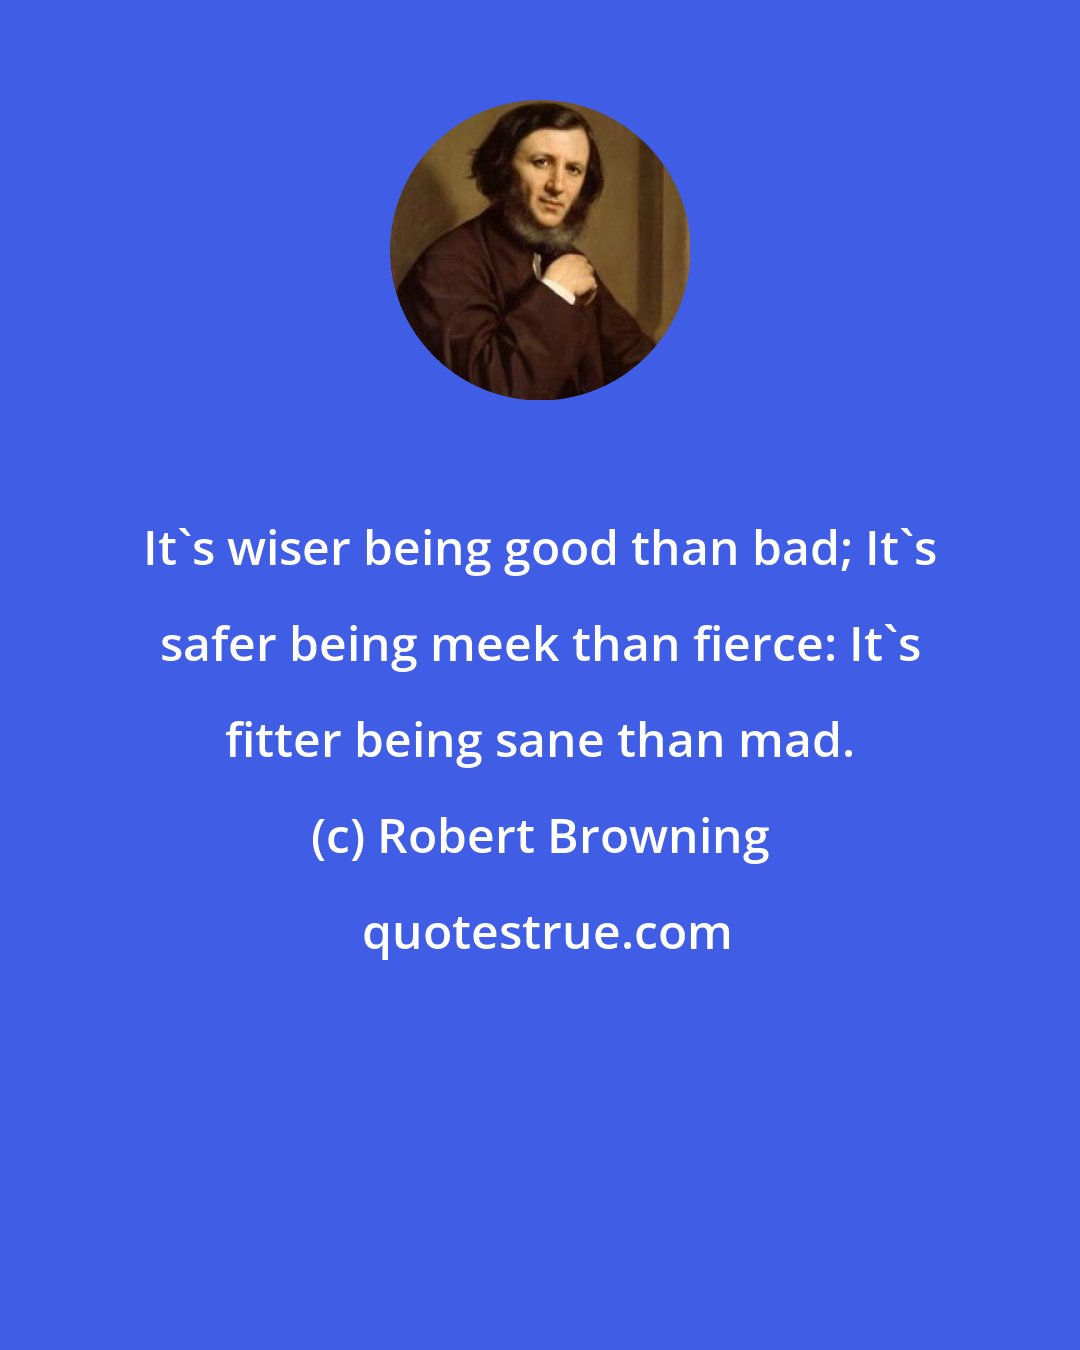 Robert Browning: It's wiser being good than bad; It's safer being meek than fierce: It's fitter being sane than mad.